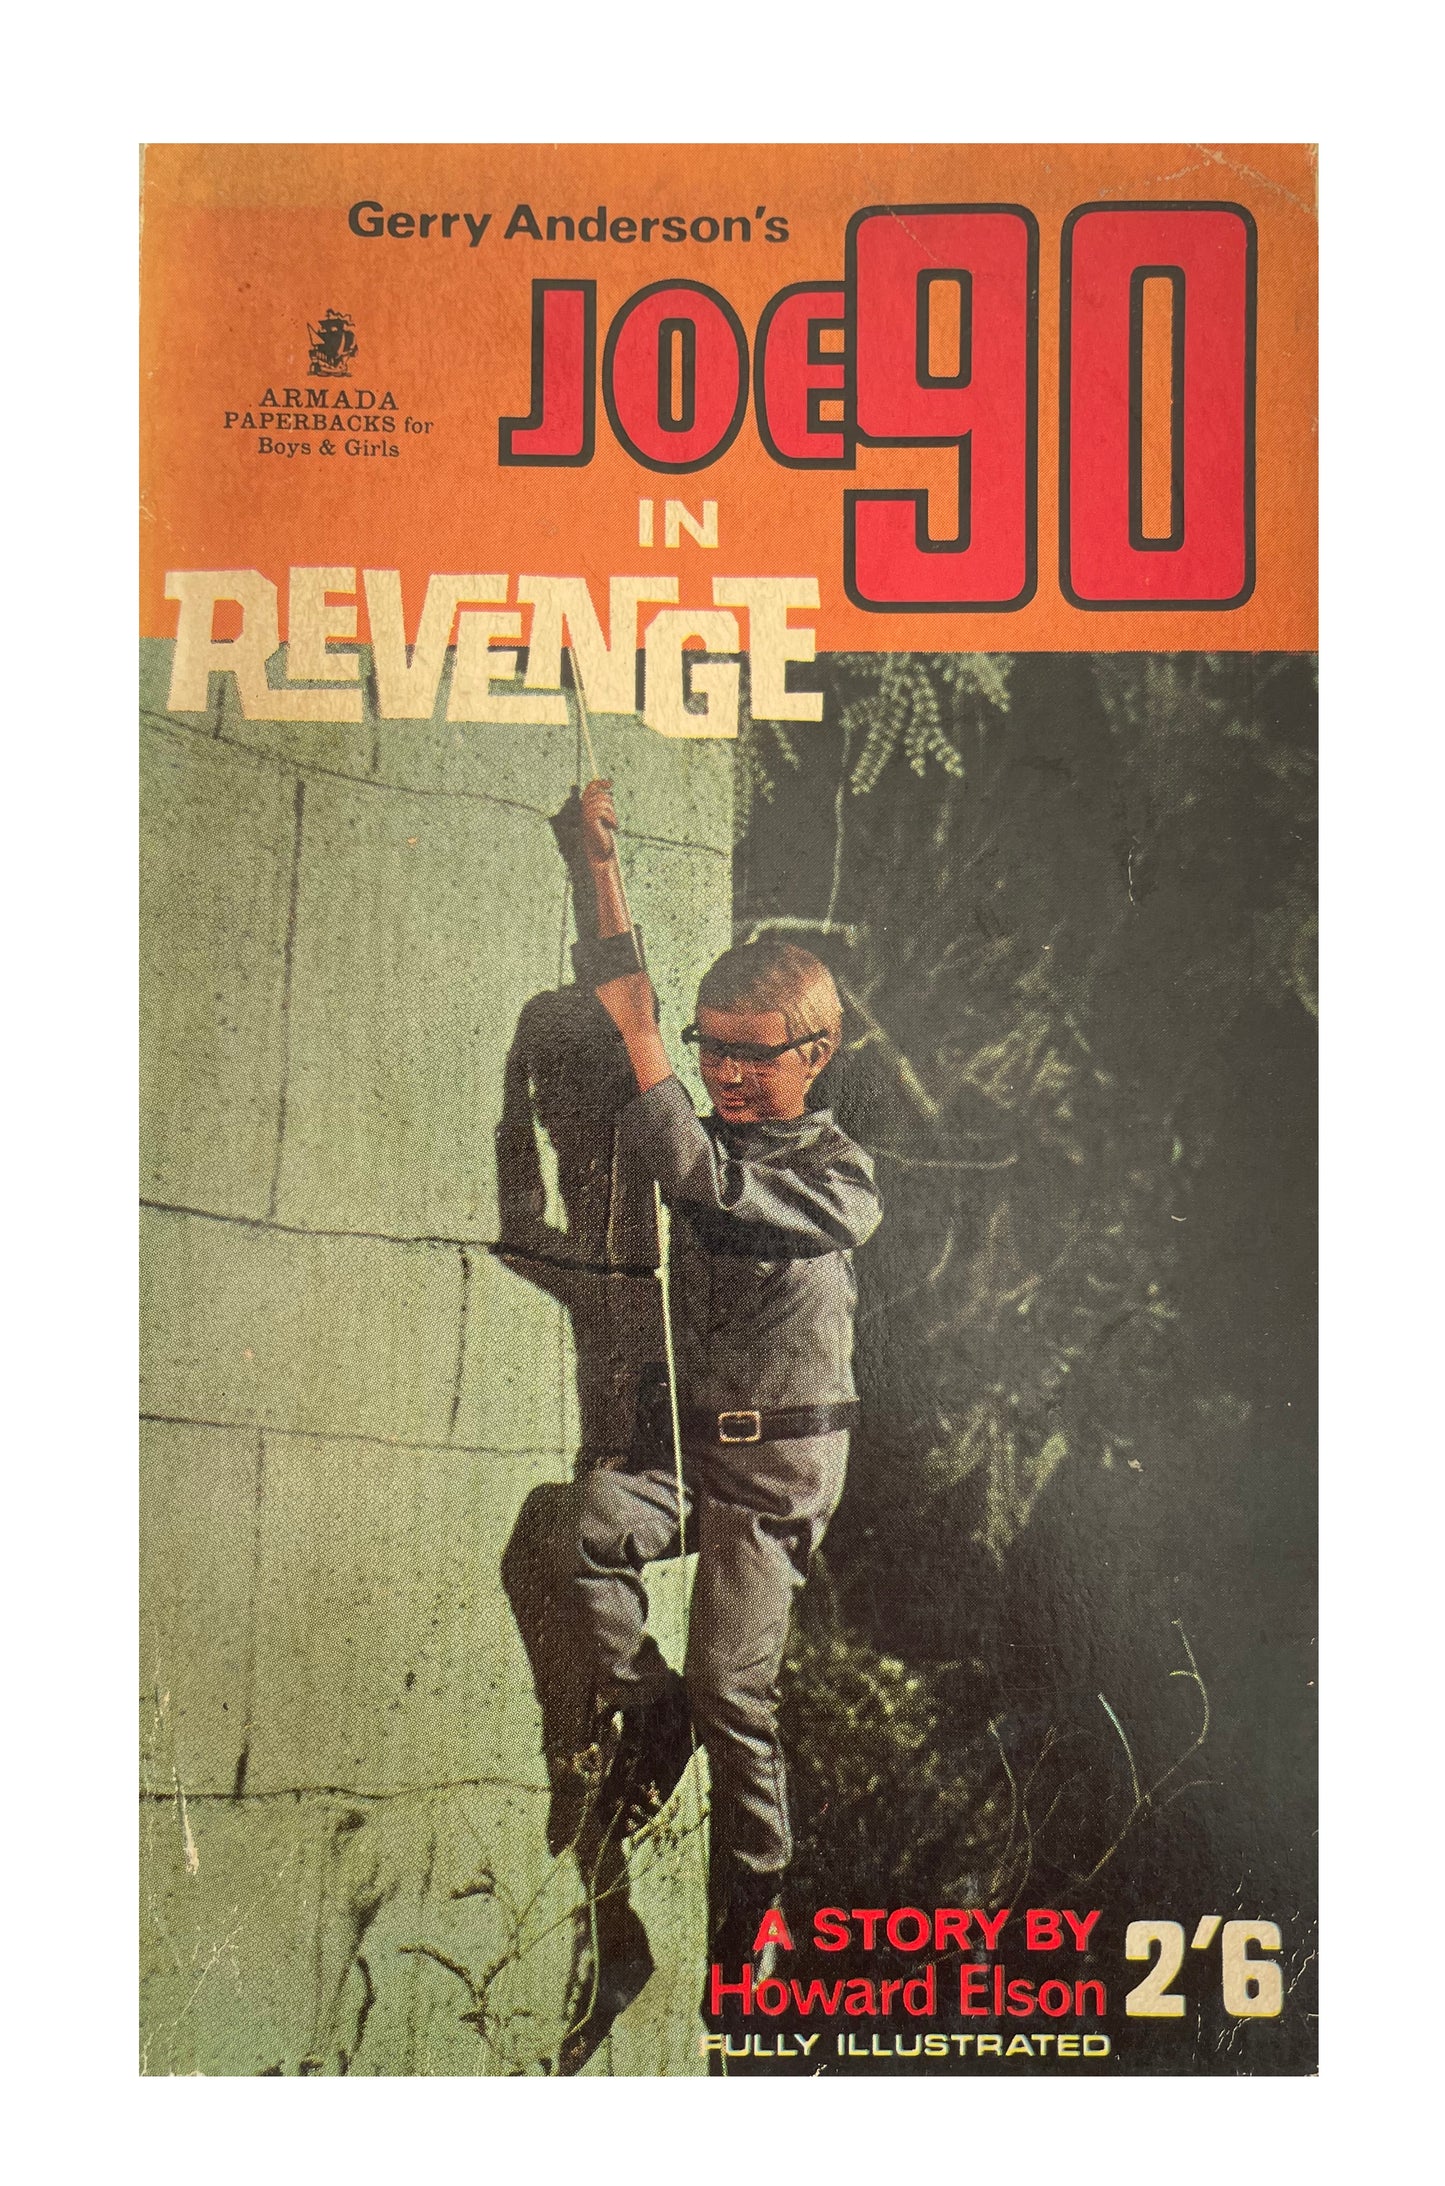 Vintage 1969 Gerry Andersons Joe 90 In Revenge Armada Paperback Book For Boys And Girls - Based On The TV Series